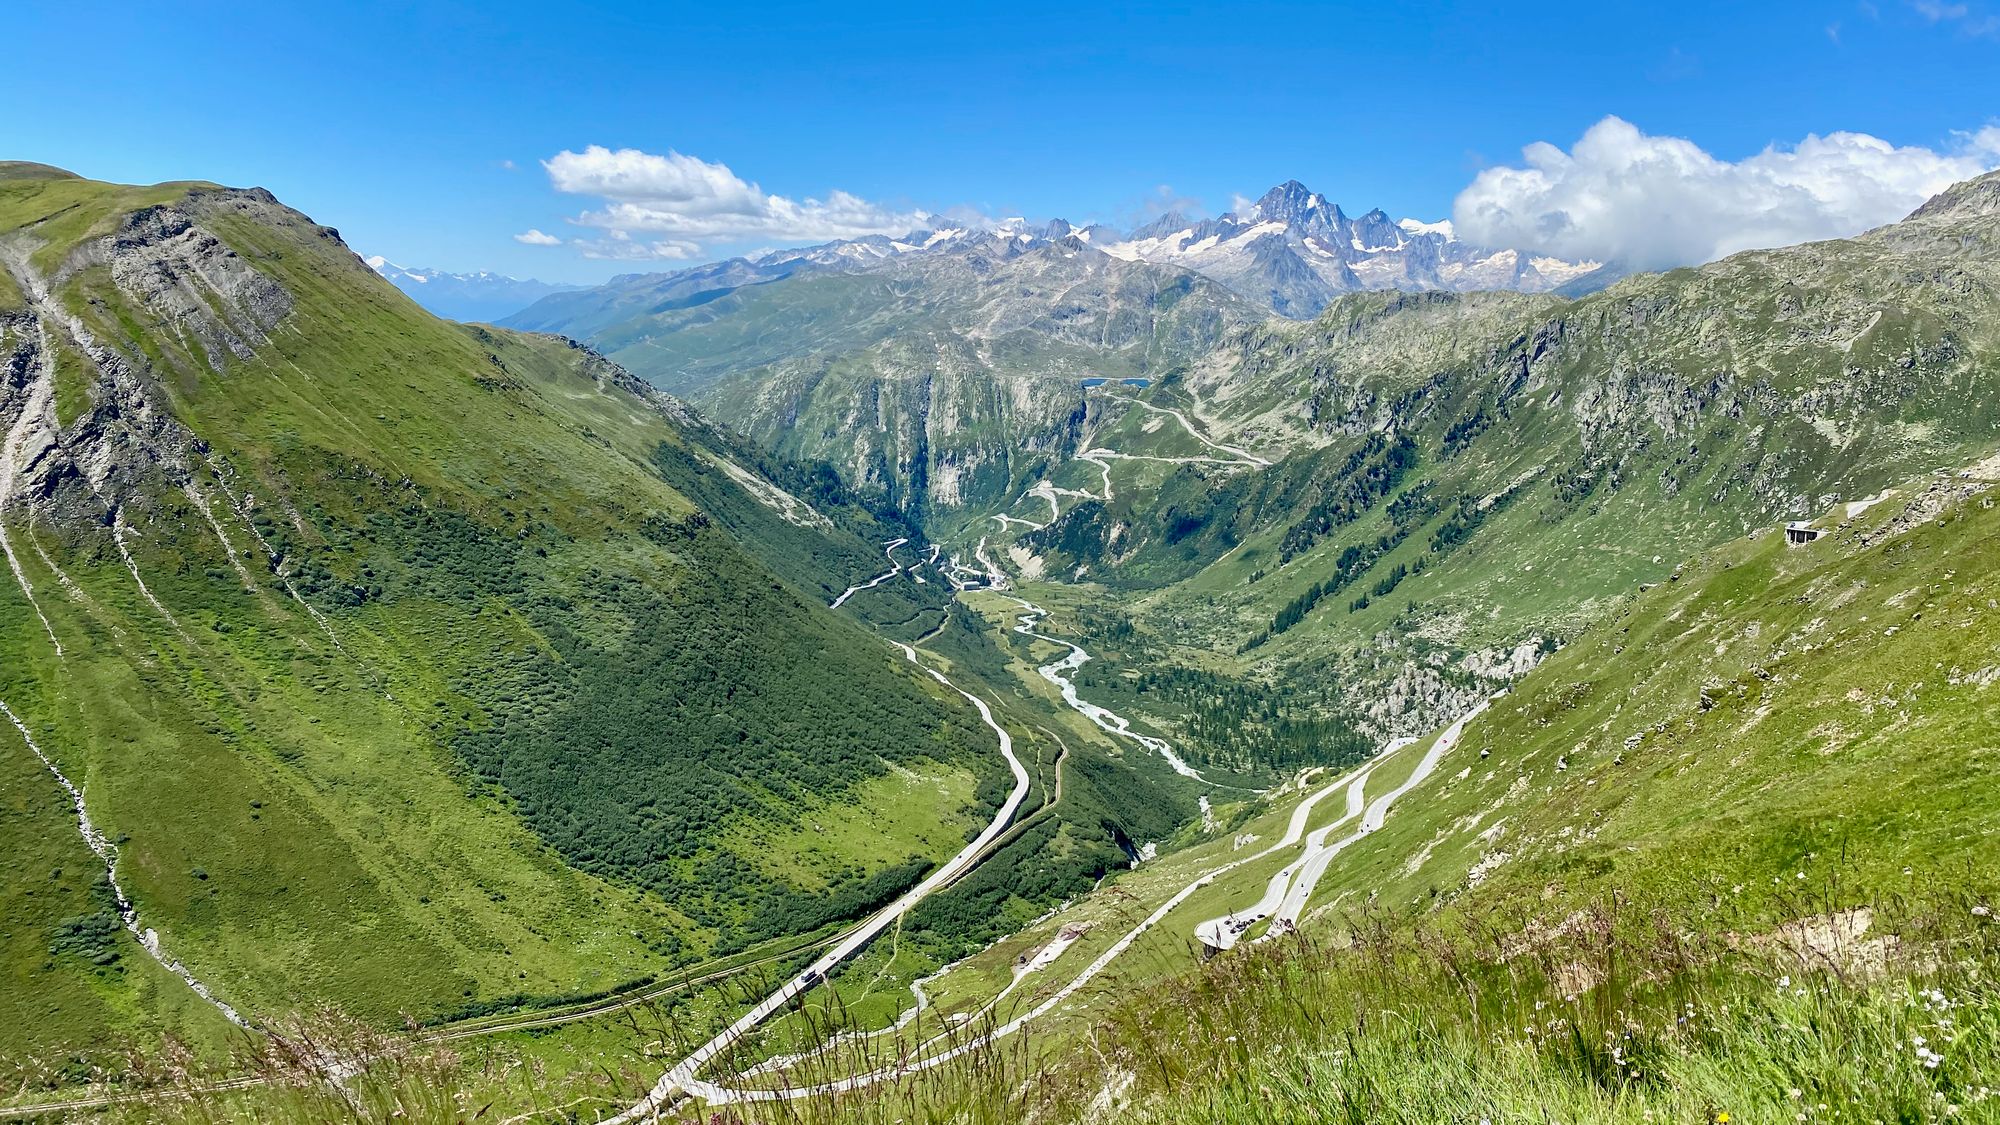 Viewpoint somewhere on the Furka Pass